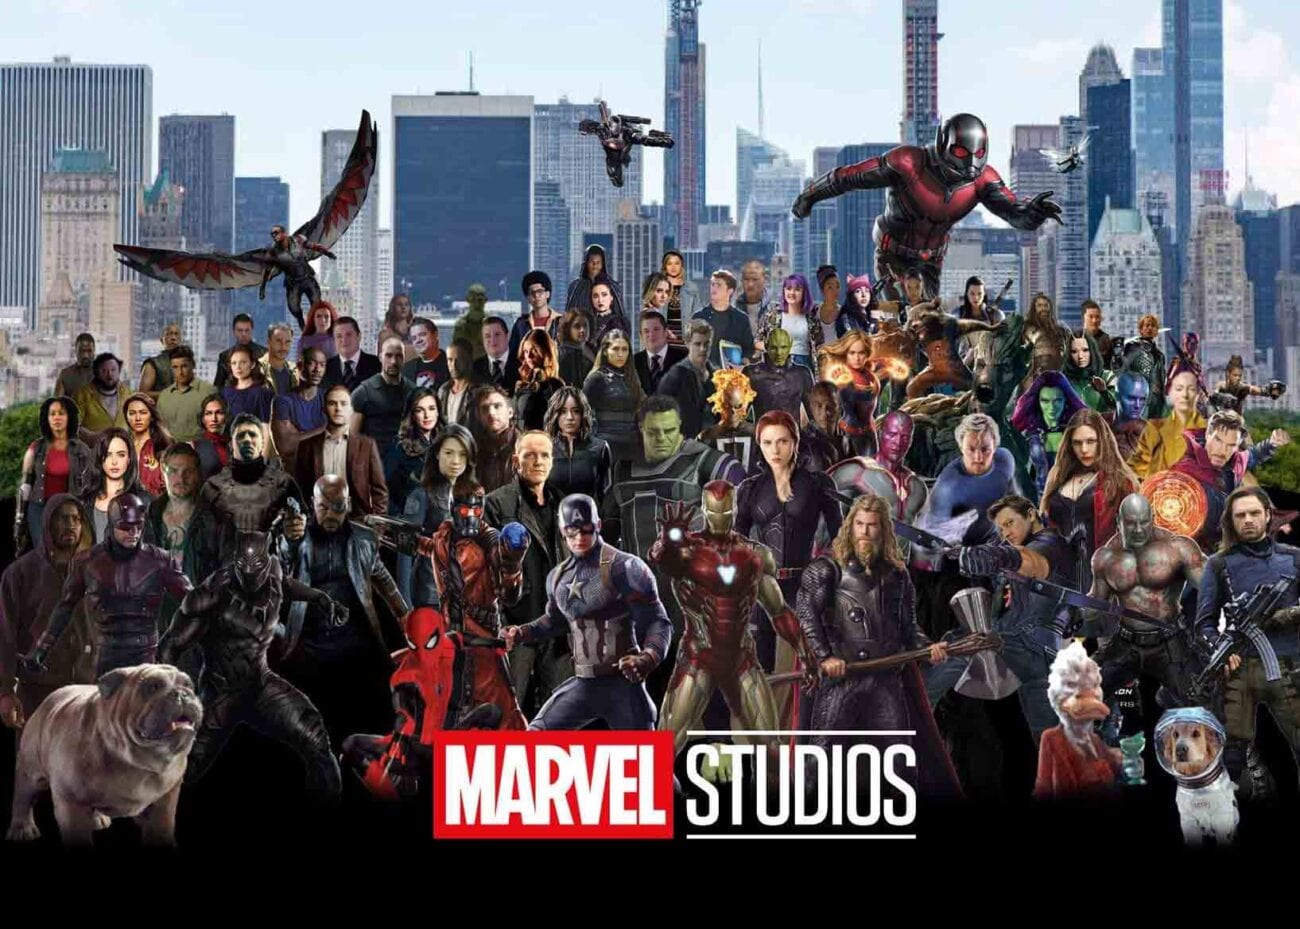 The Marvel cinematic universe is the most ambitious, interconnected movie franchise in history. However, some movies don't get the love they deserve.